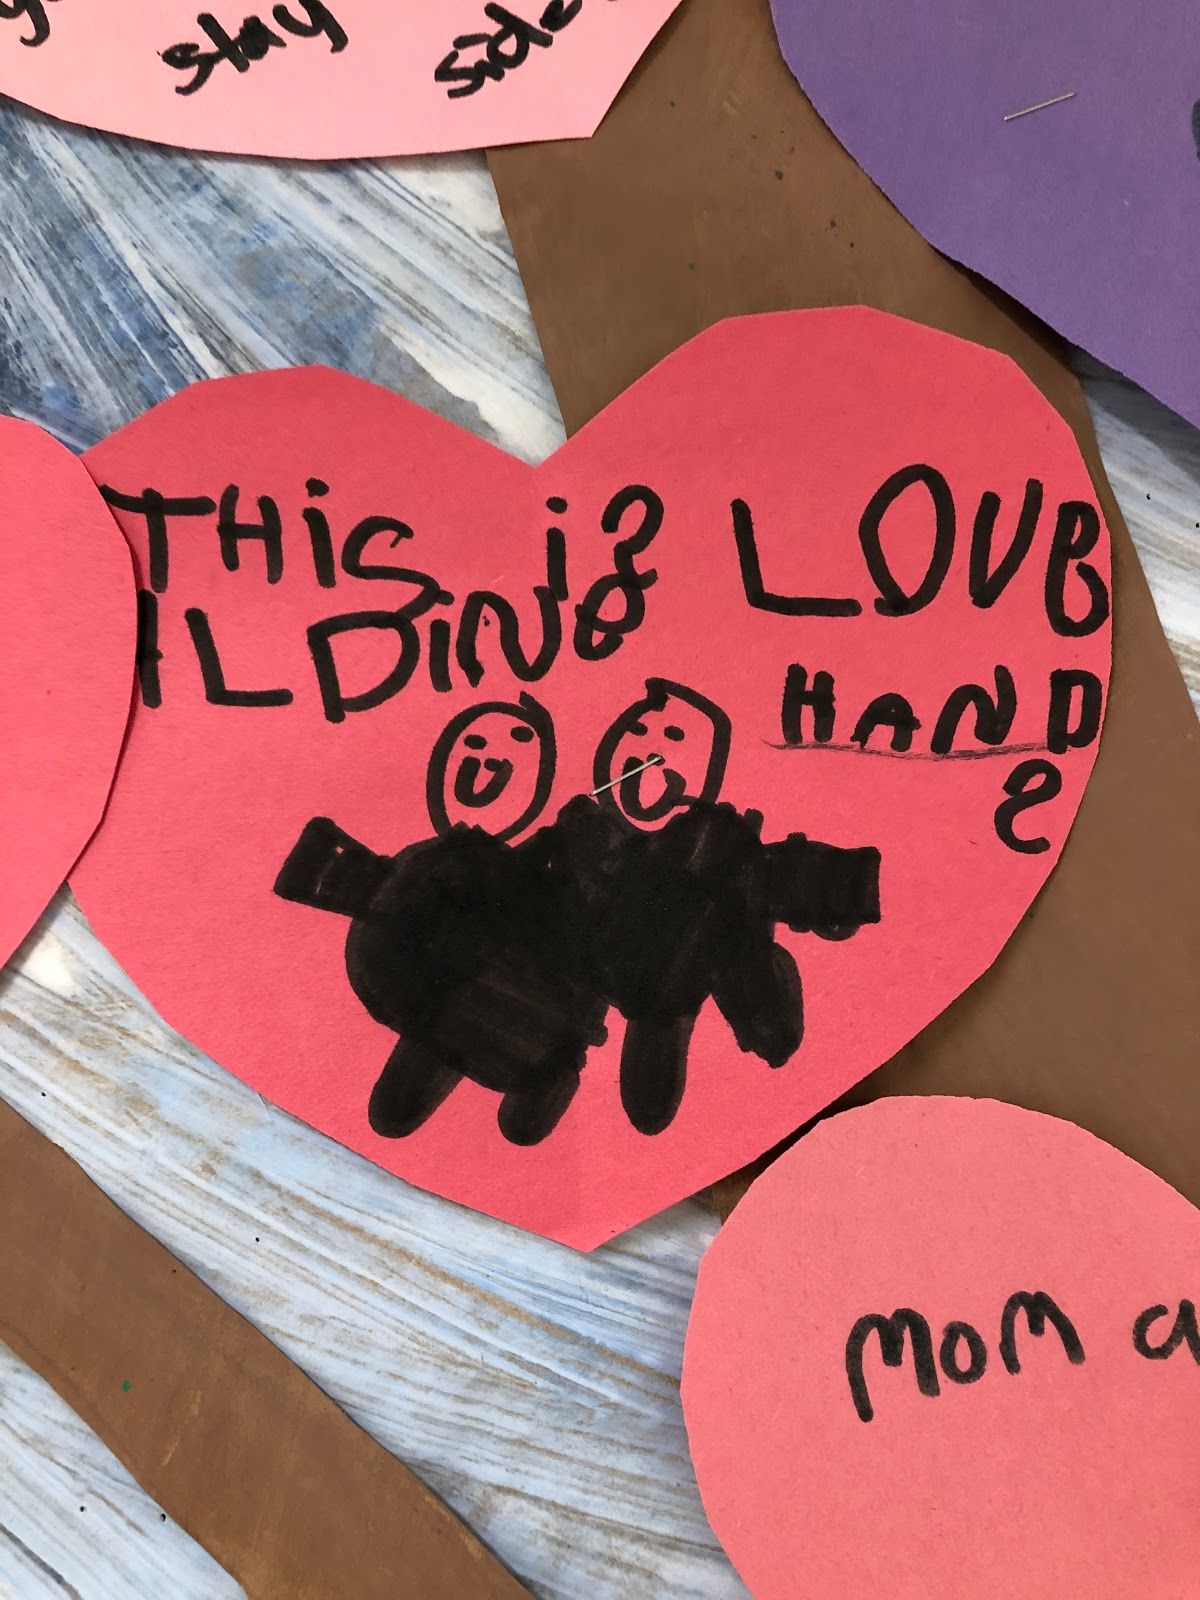 Kindergarten students at Primrose Elementary School have been busy spreading the love through a project at the school.